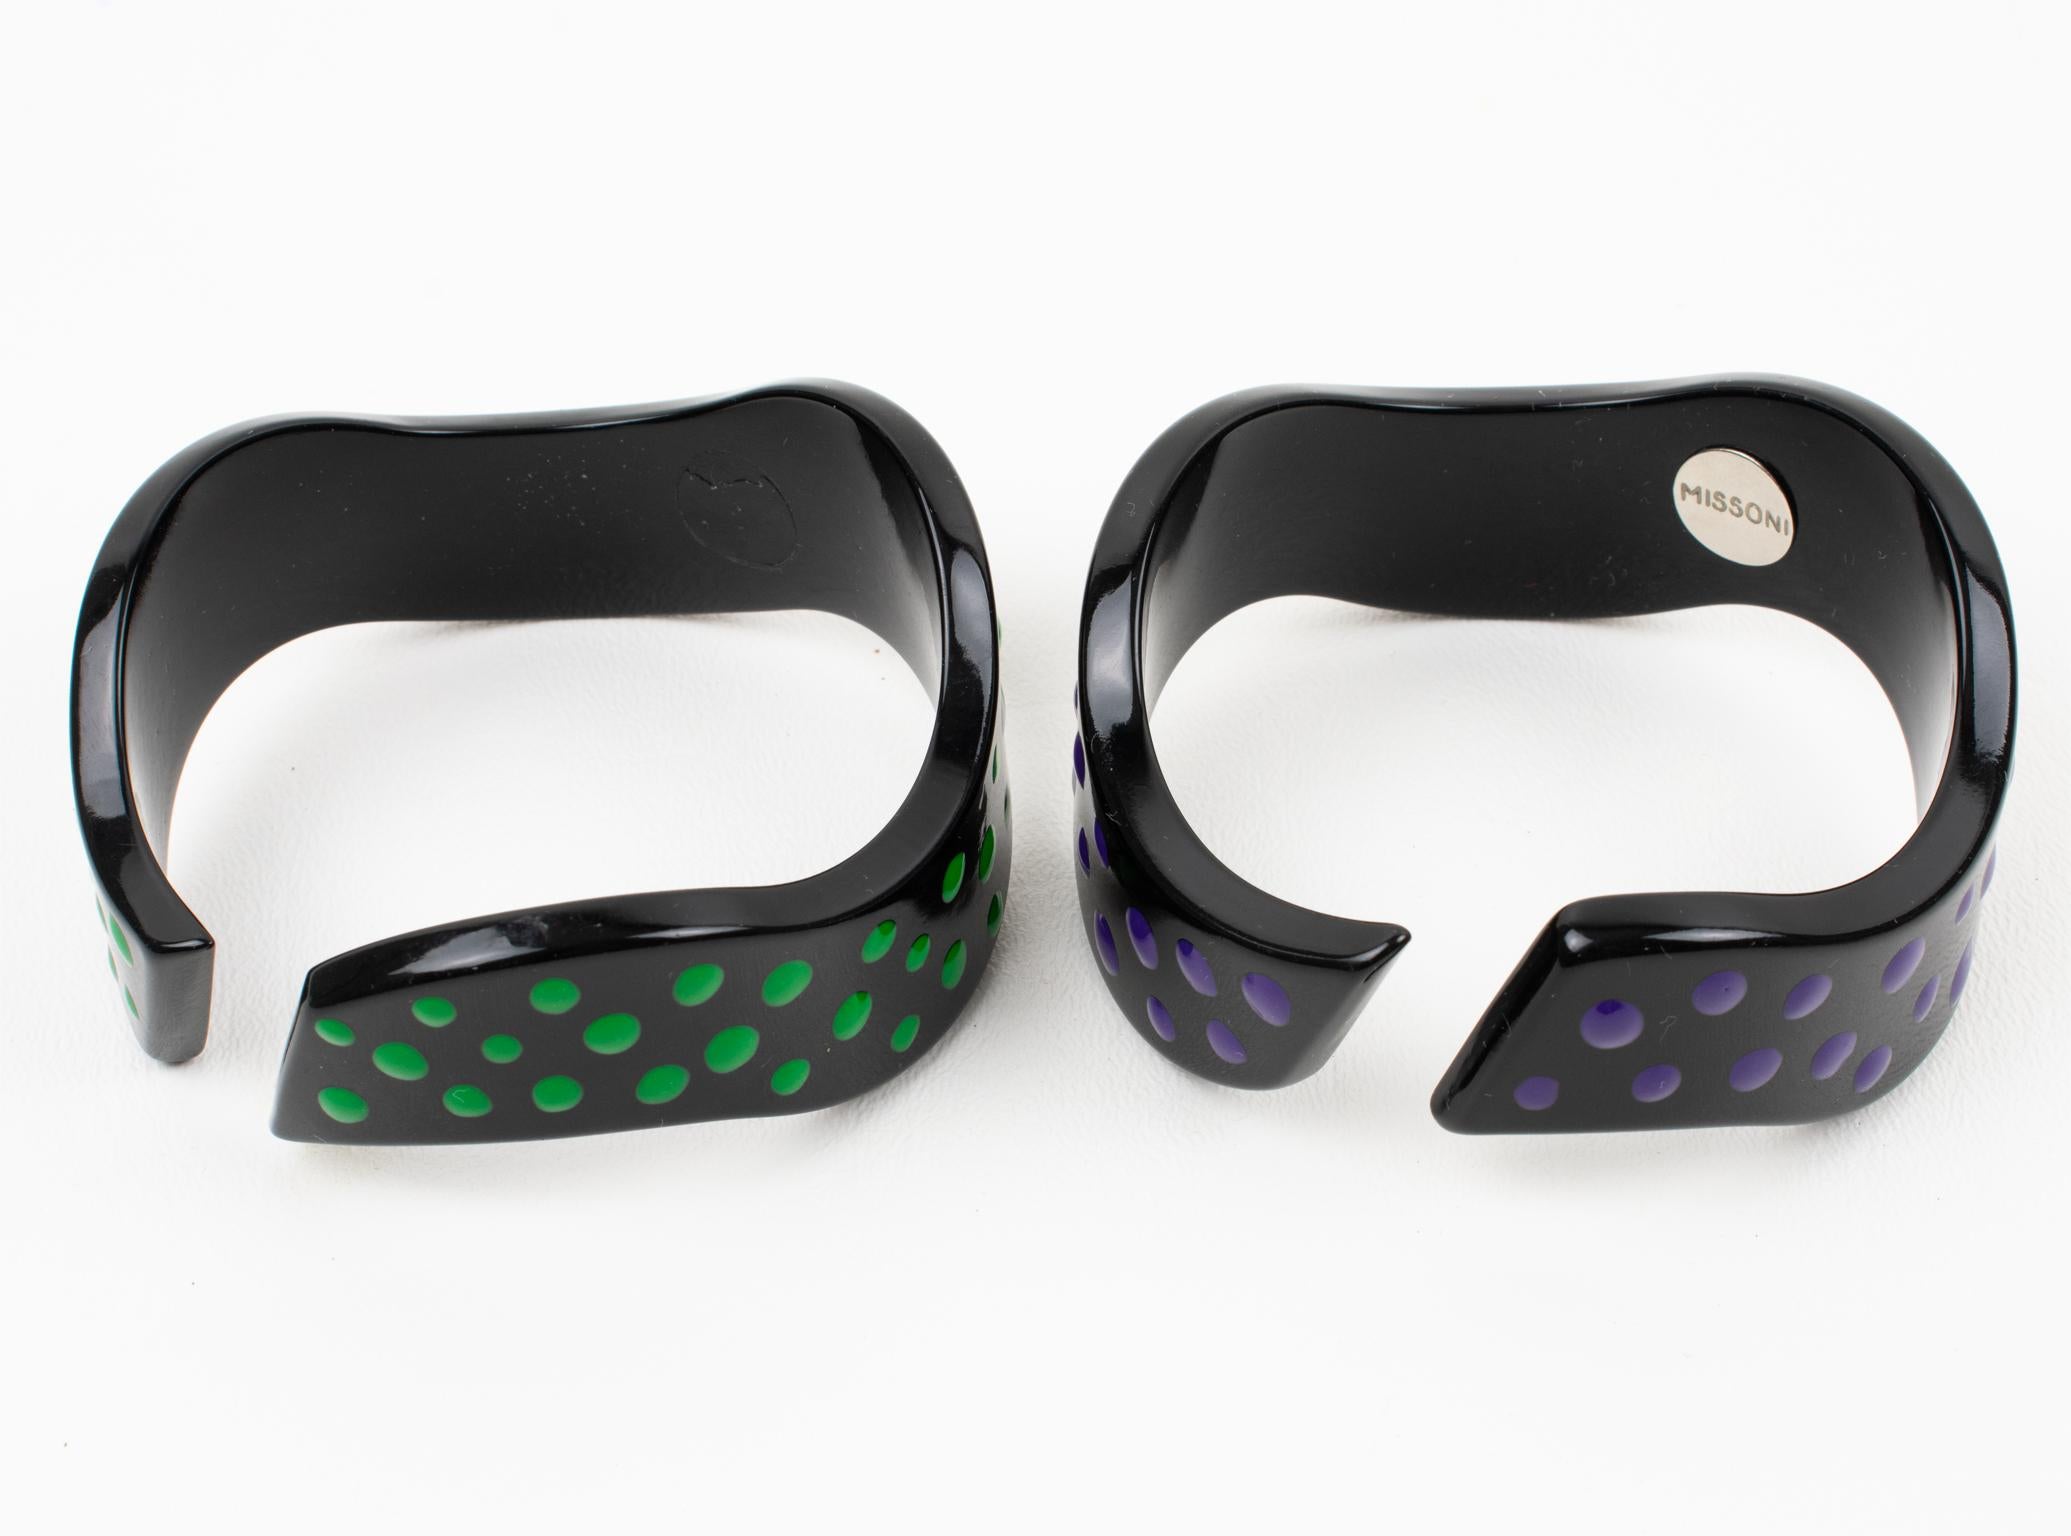 Missoni Black Lucite Resin Bracelet Bangle Purple and Green Dots, a pair For Sale 2